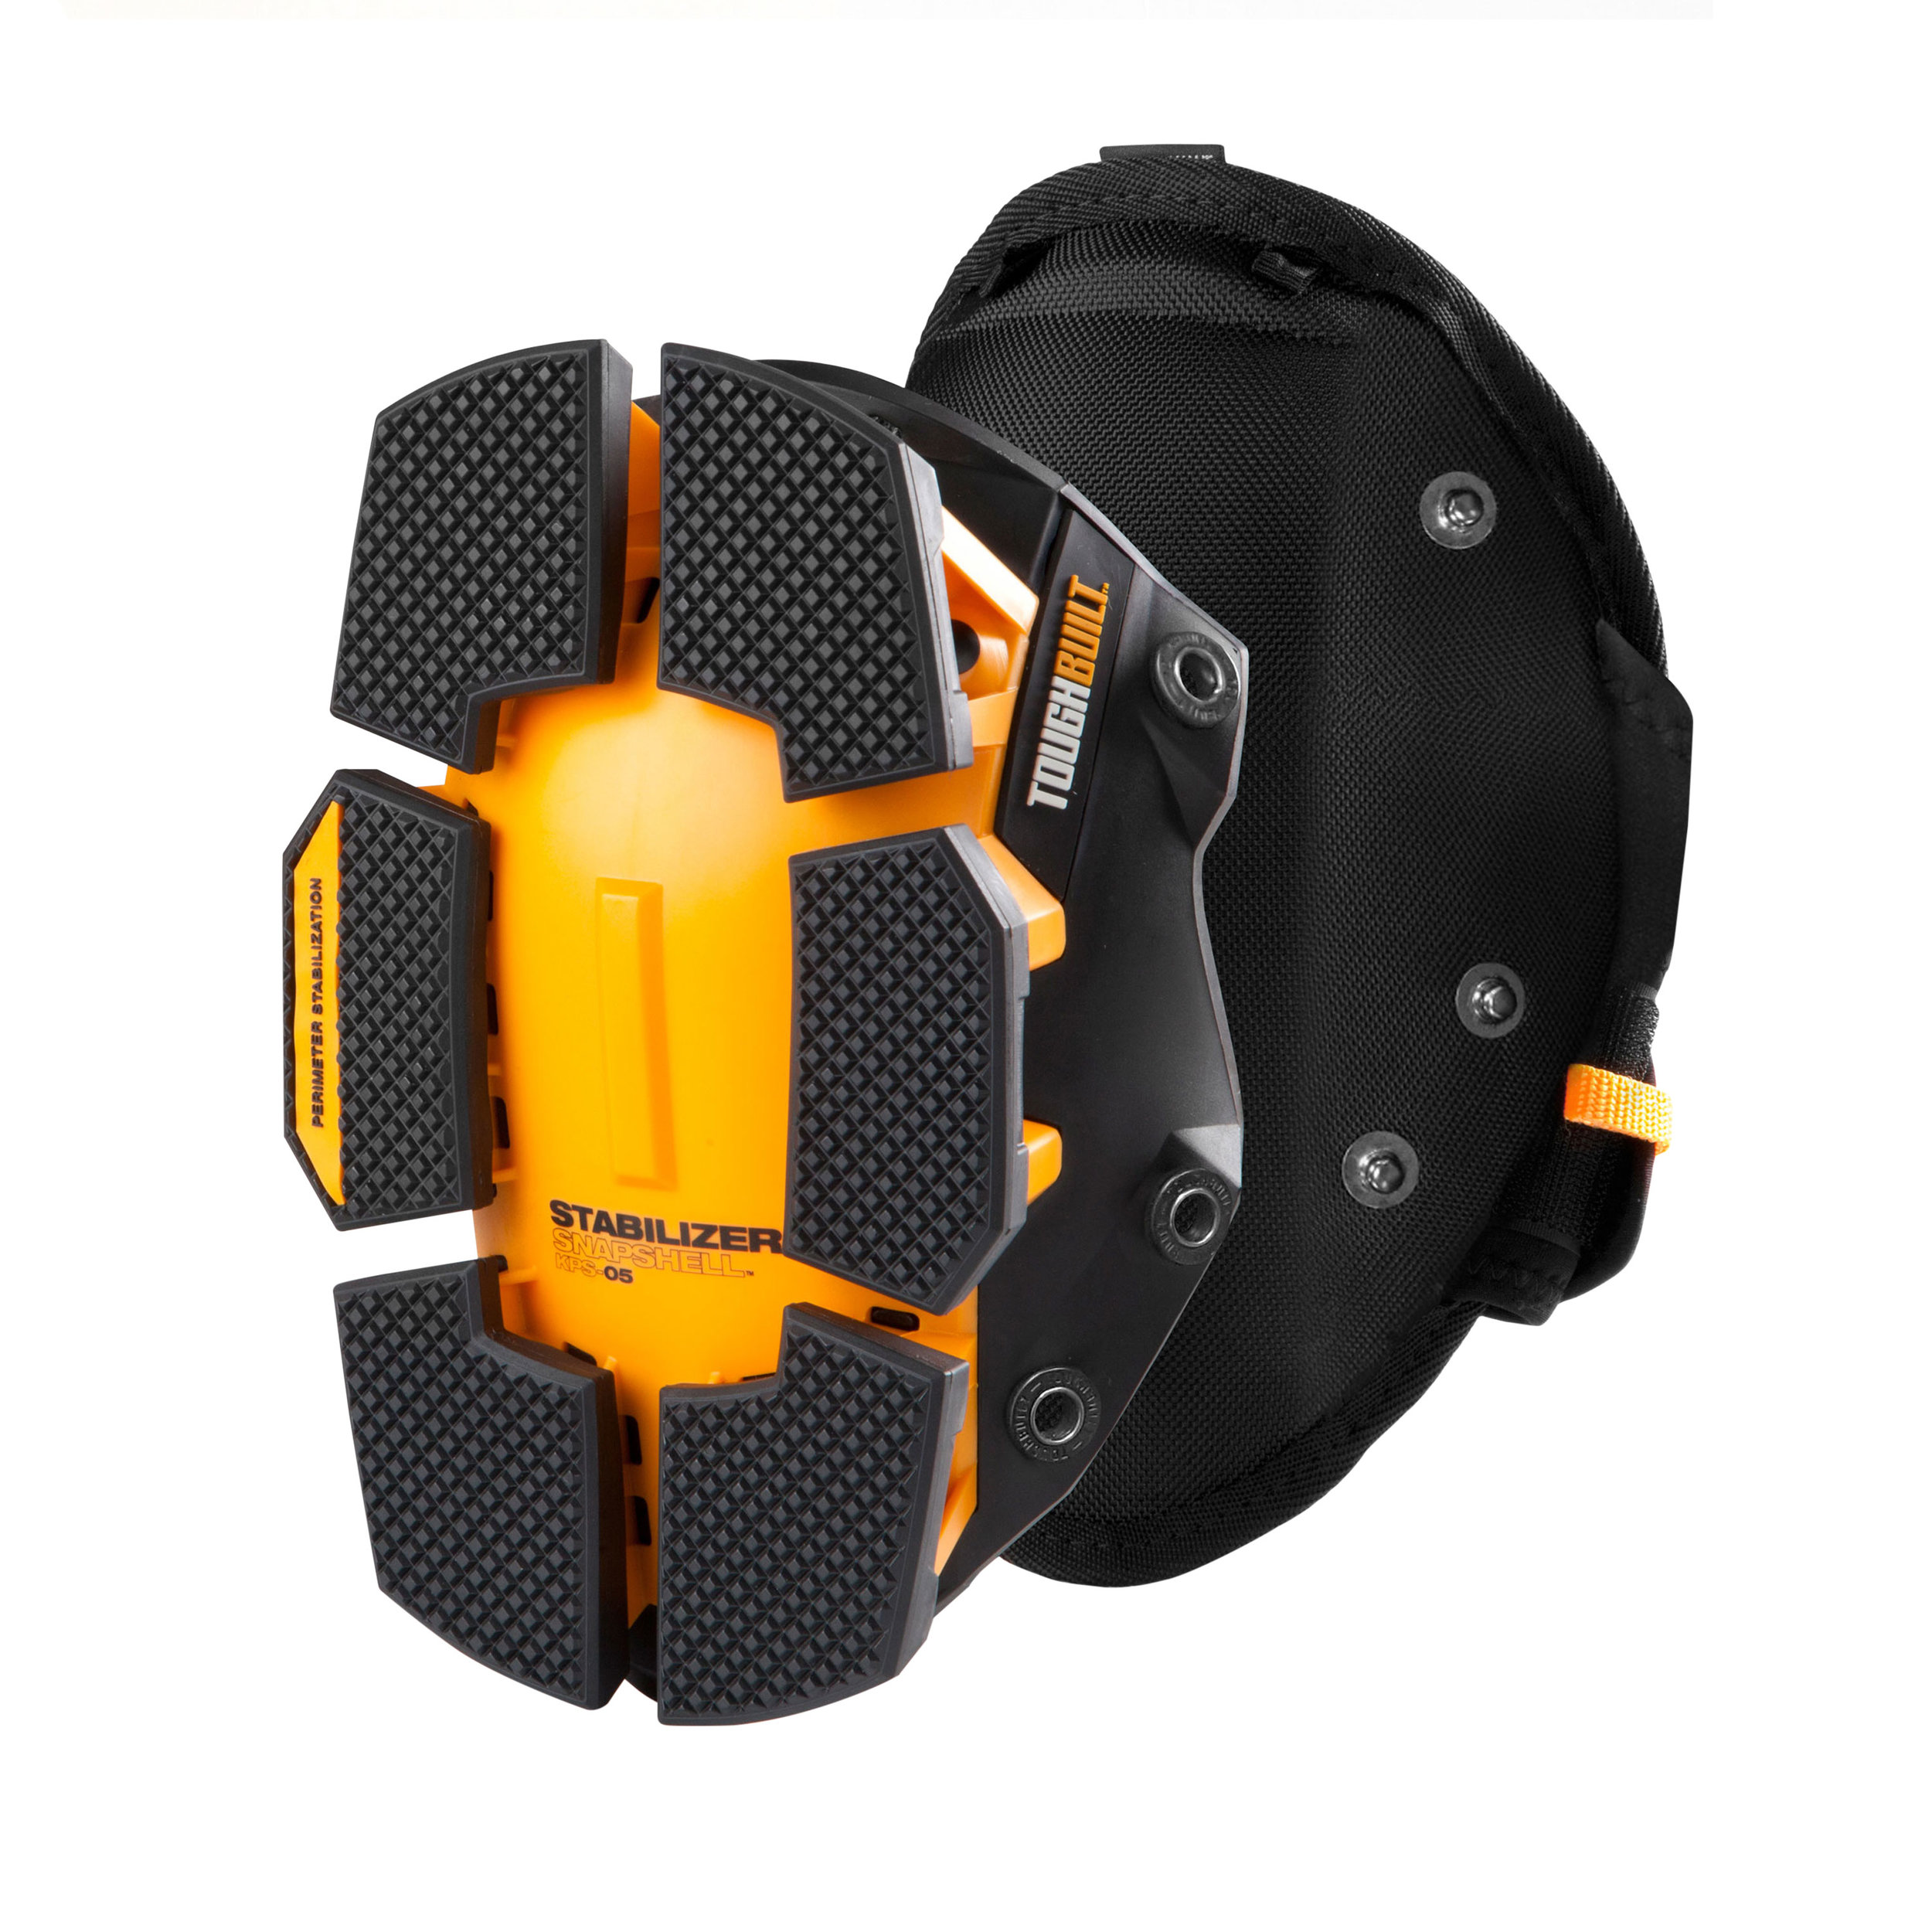 TOUGHBUILT kneepads Stabilizer SnapShell Comfortable Heavy Duty Safety Gear 